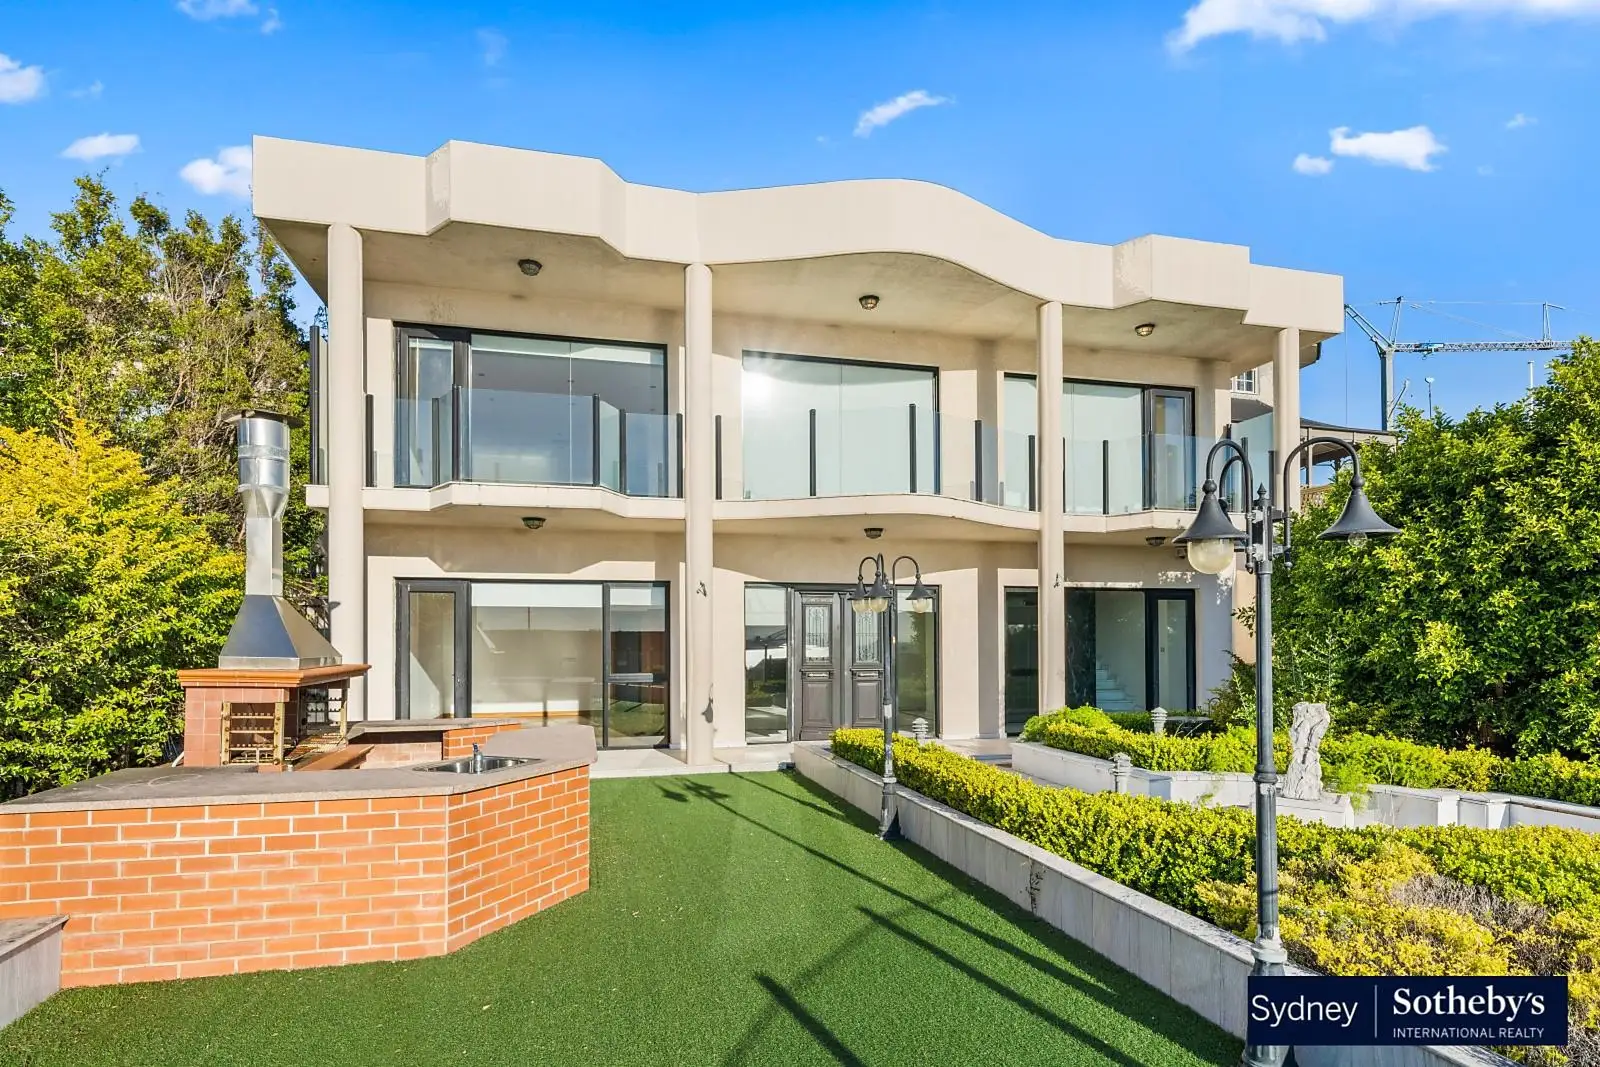 31a New South Head Road, Vaucluse Leased by Sydney Sotheby's International Realty - image 1